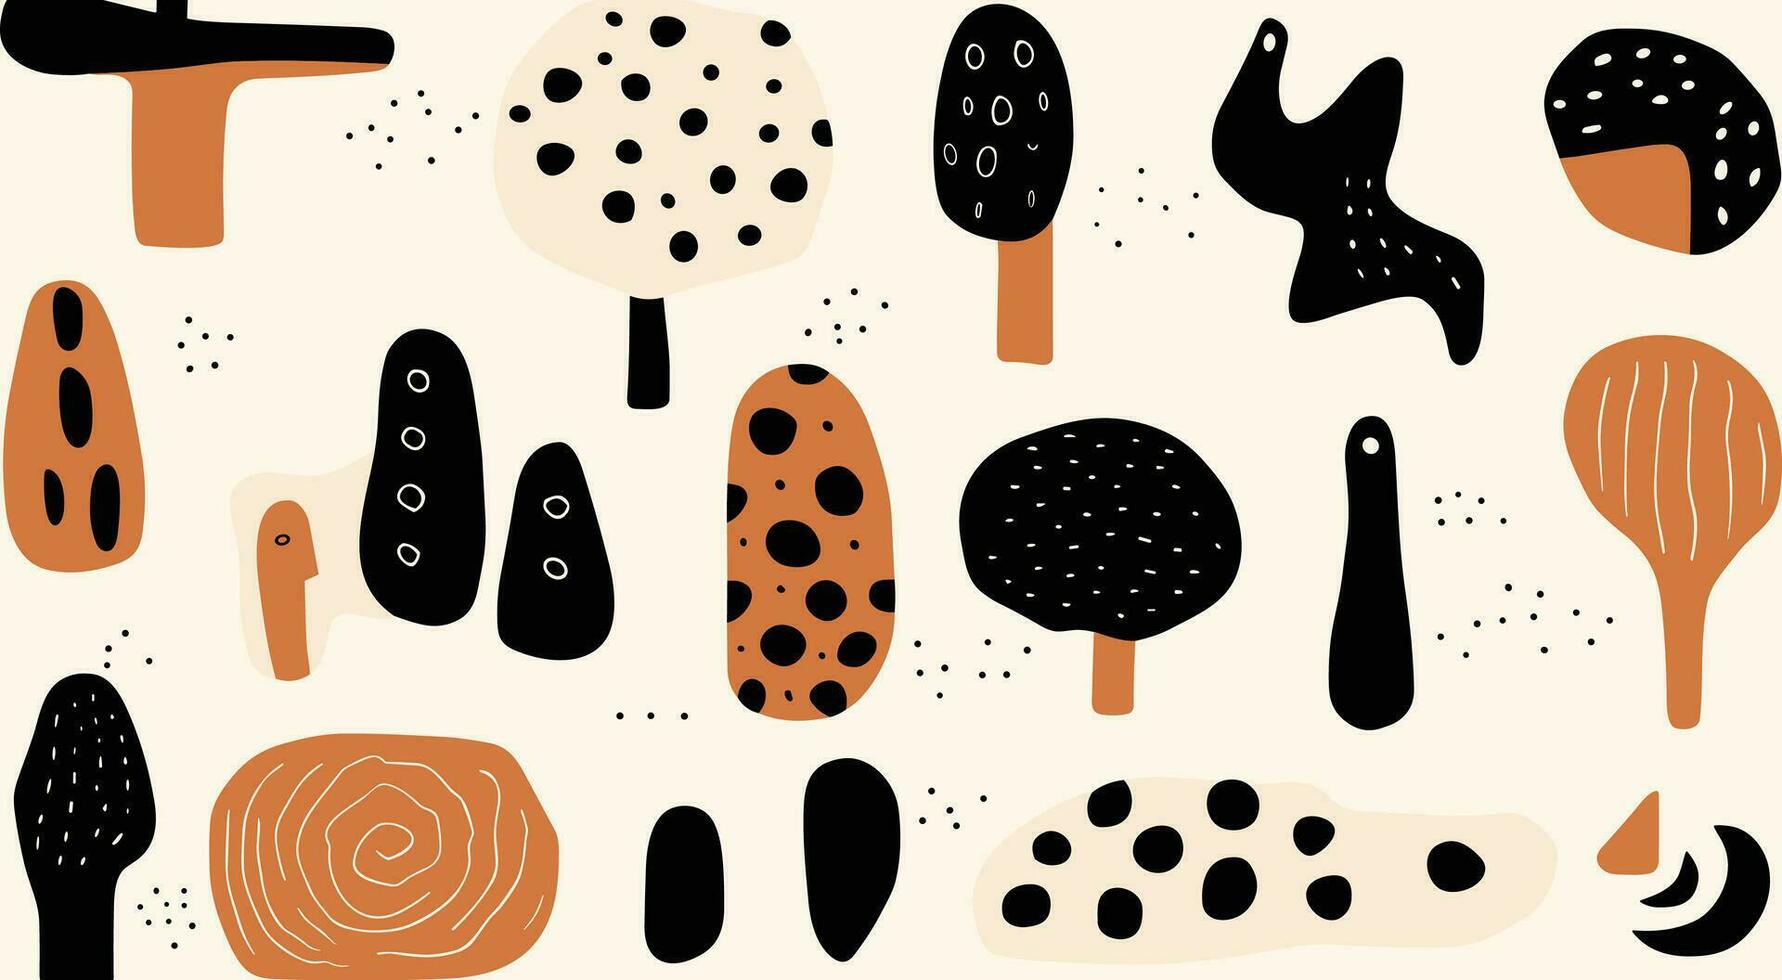 some abstract and black and white shapes in some form, in the style of earthy organic shapes, memphis design, light black and light beige, whimsical figures, bold color blobs, hand-drawn elements vector